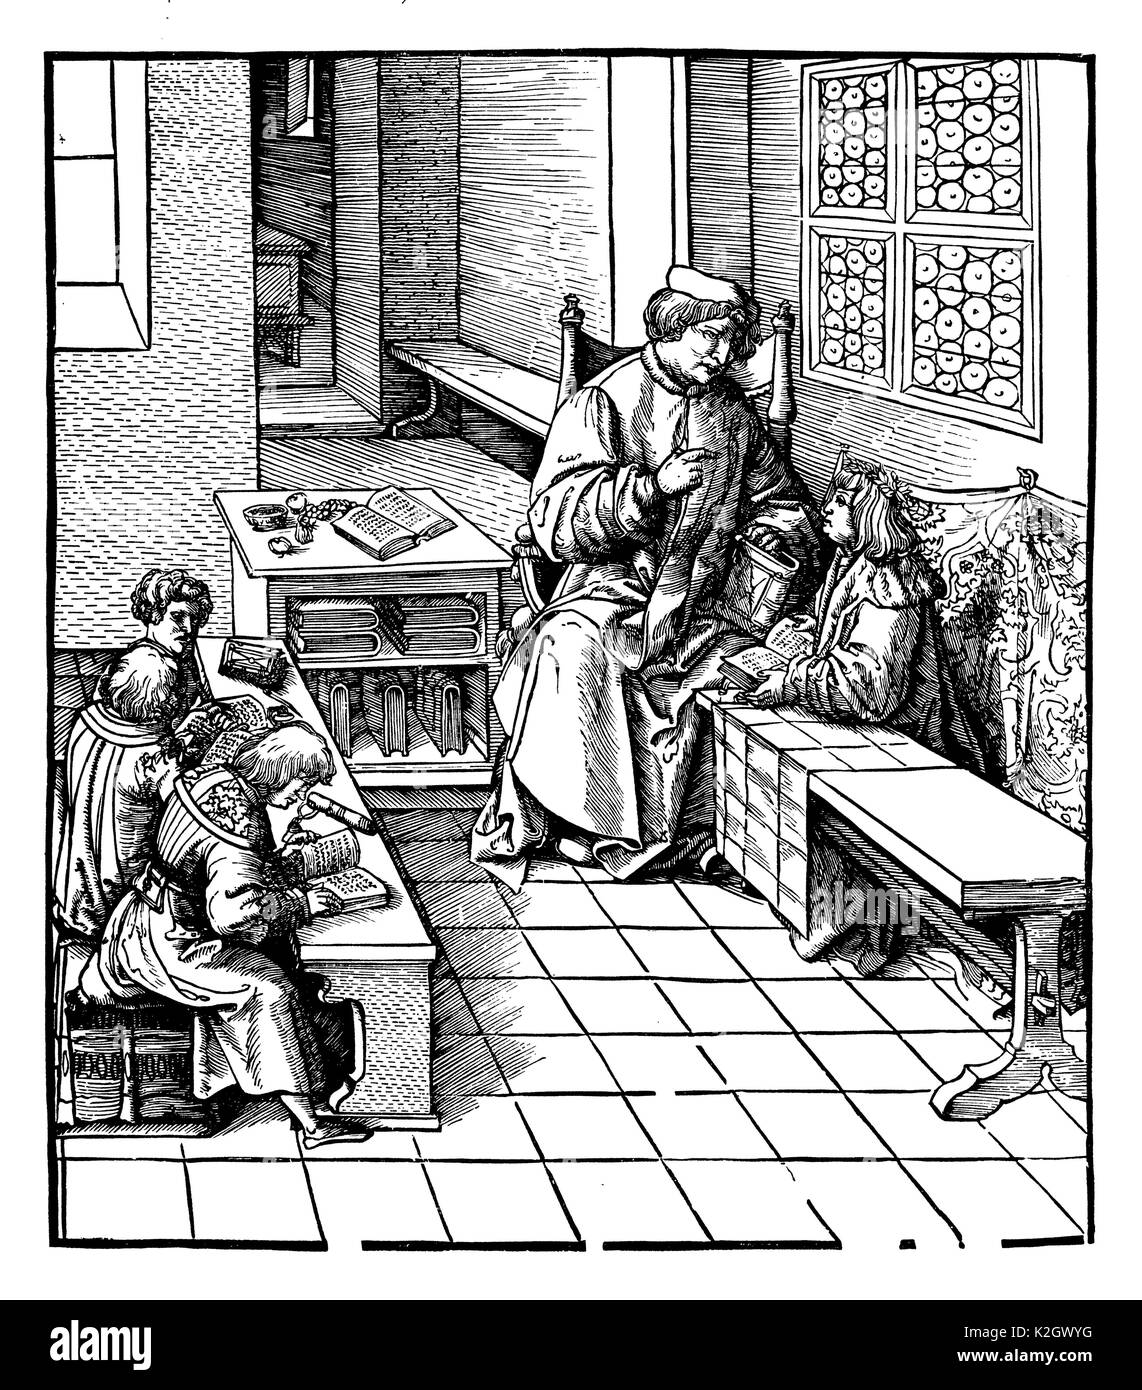 Maximilian I is taught. Facsimile of a woodcut in 'Weisskunig''; Illustrated by Hans Burgkmair (1473 - 1531)' Stock Photo